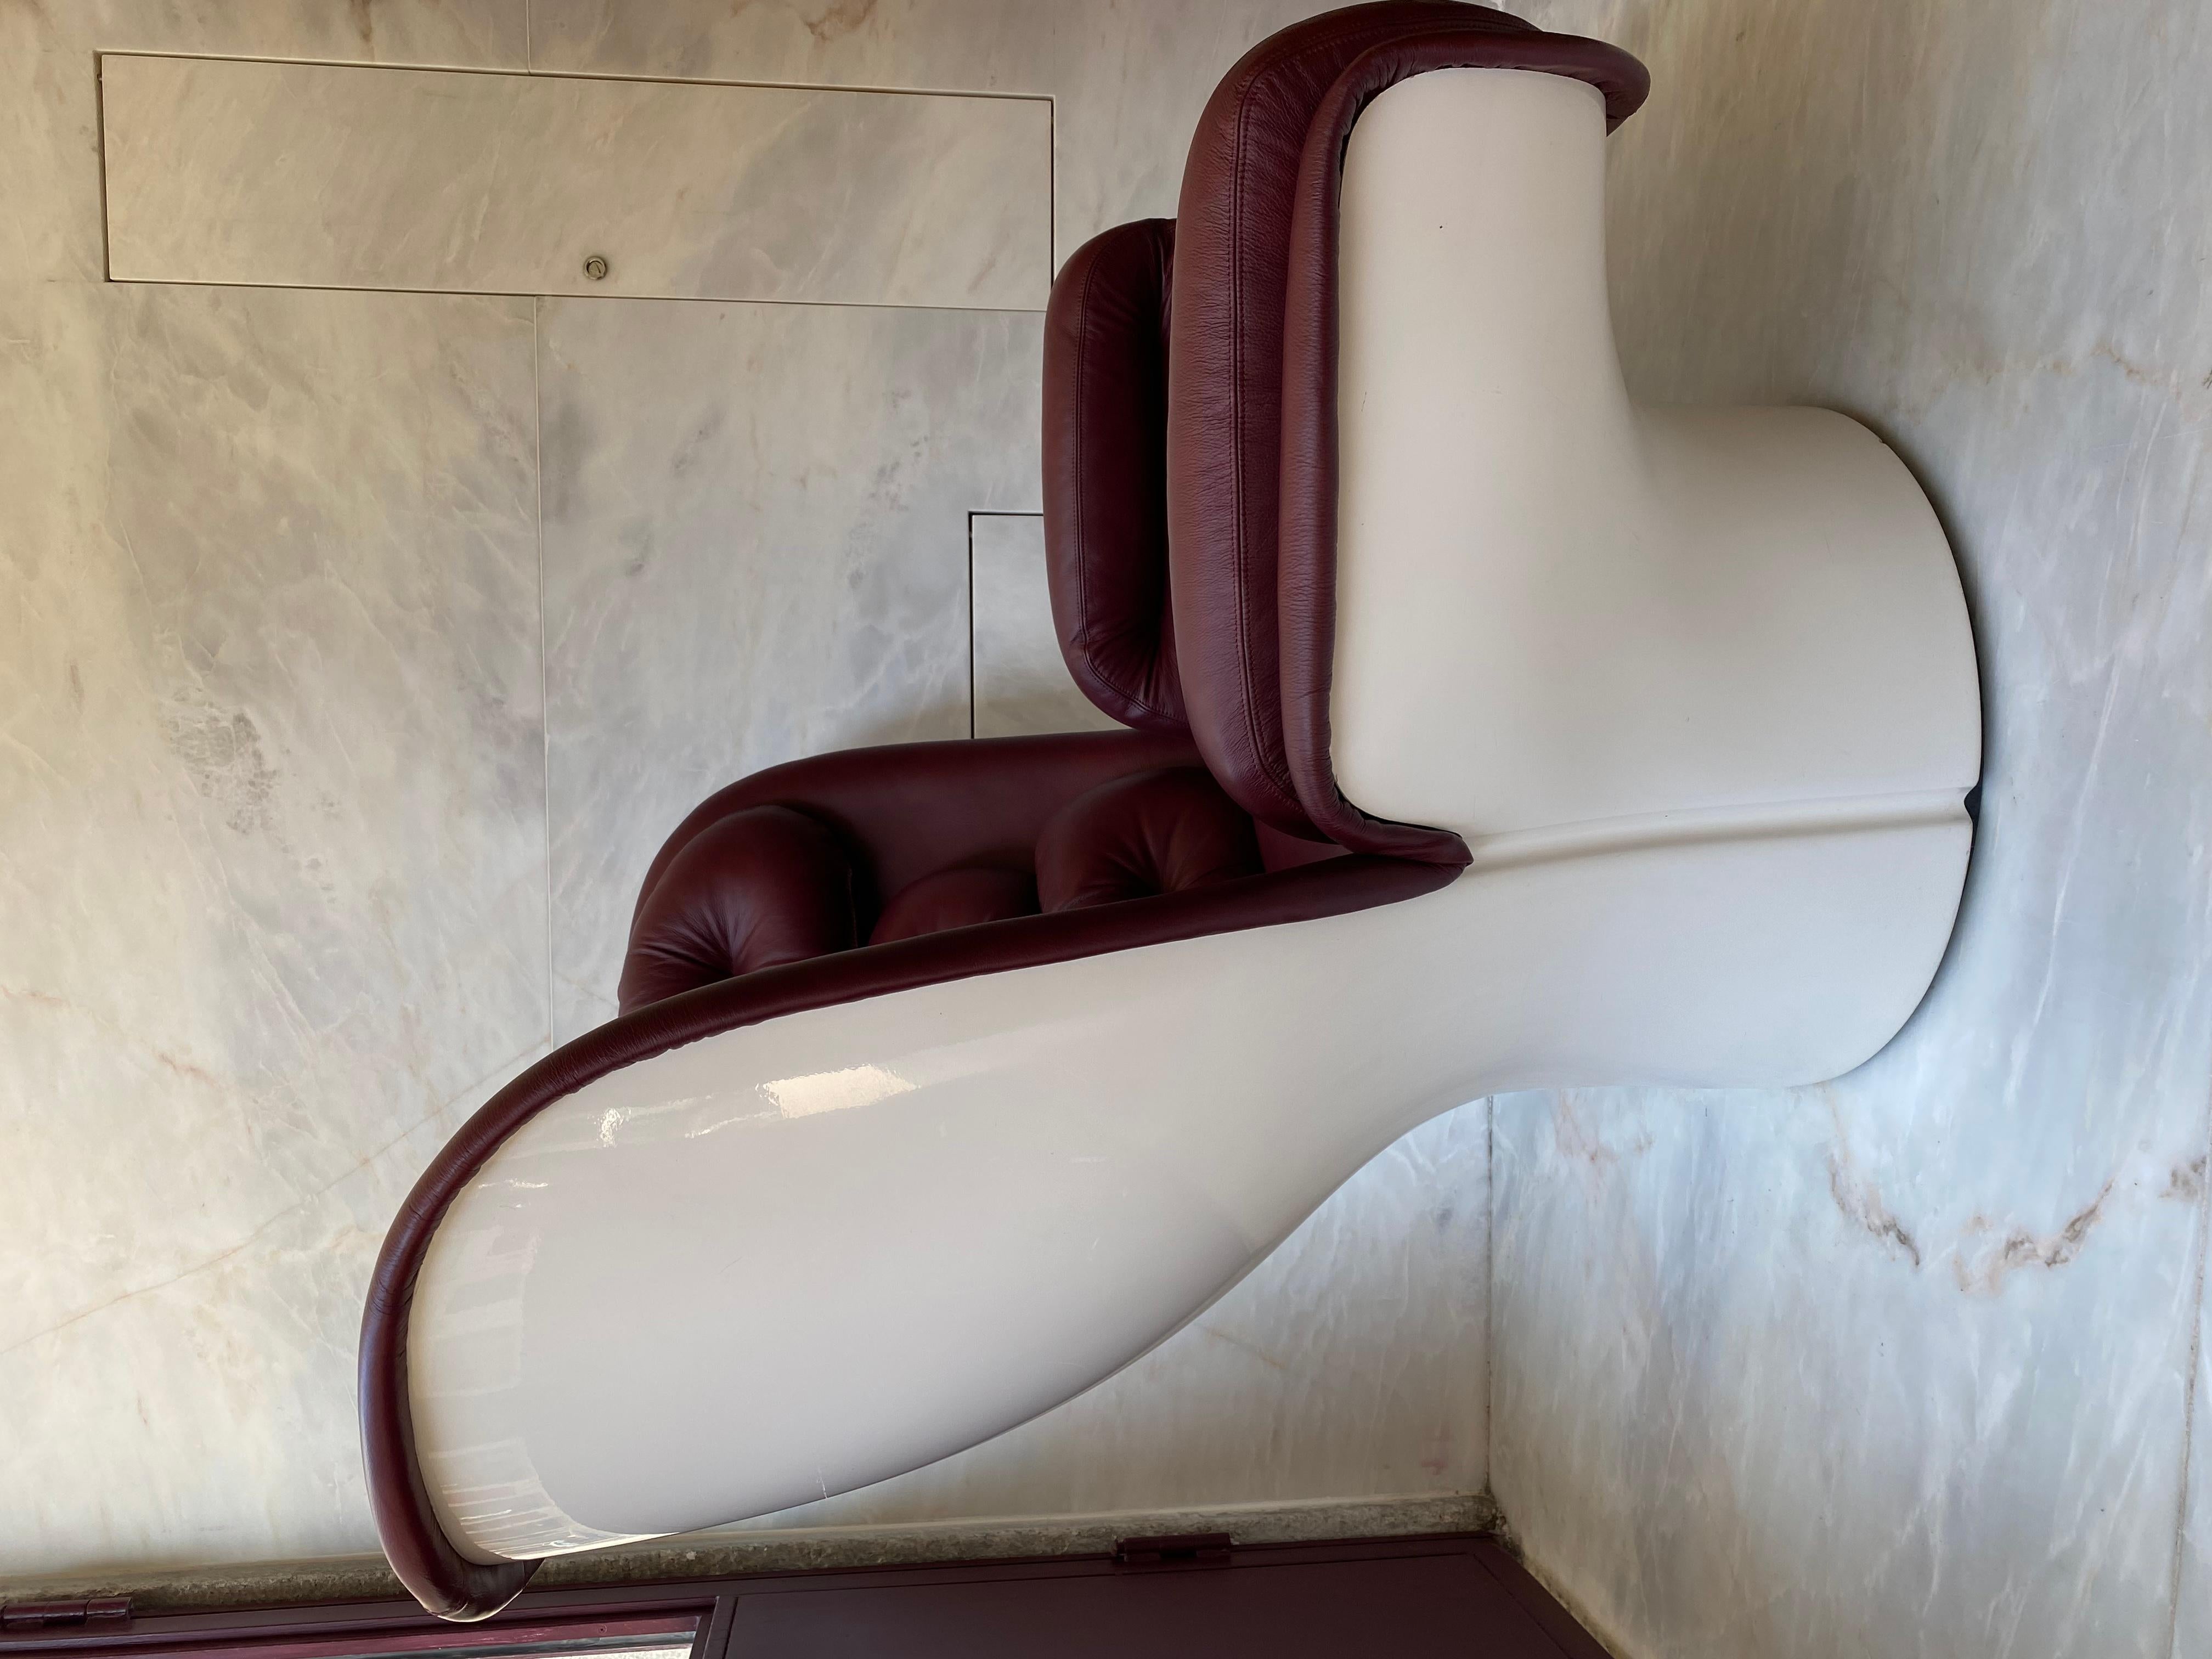 Elda Chaie designed in 1963 by Joe Colombo. produced in Italy.
It was considered very futuristic for its time.

The structure - Fiberglass white shell rotates on a 360 ° swivel base, which allows great mobility and orientation of the